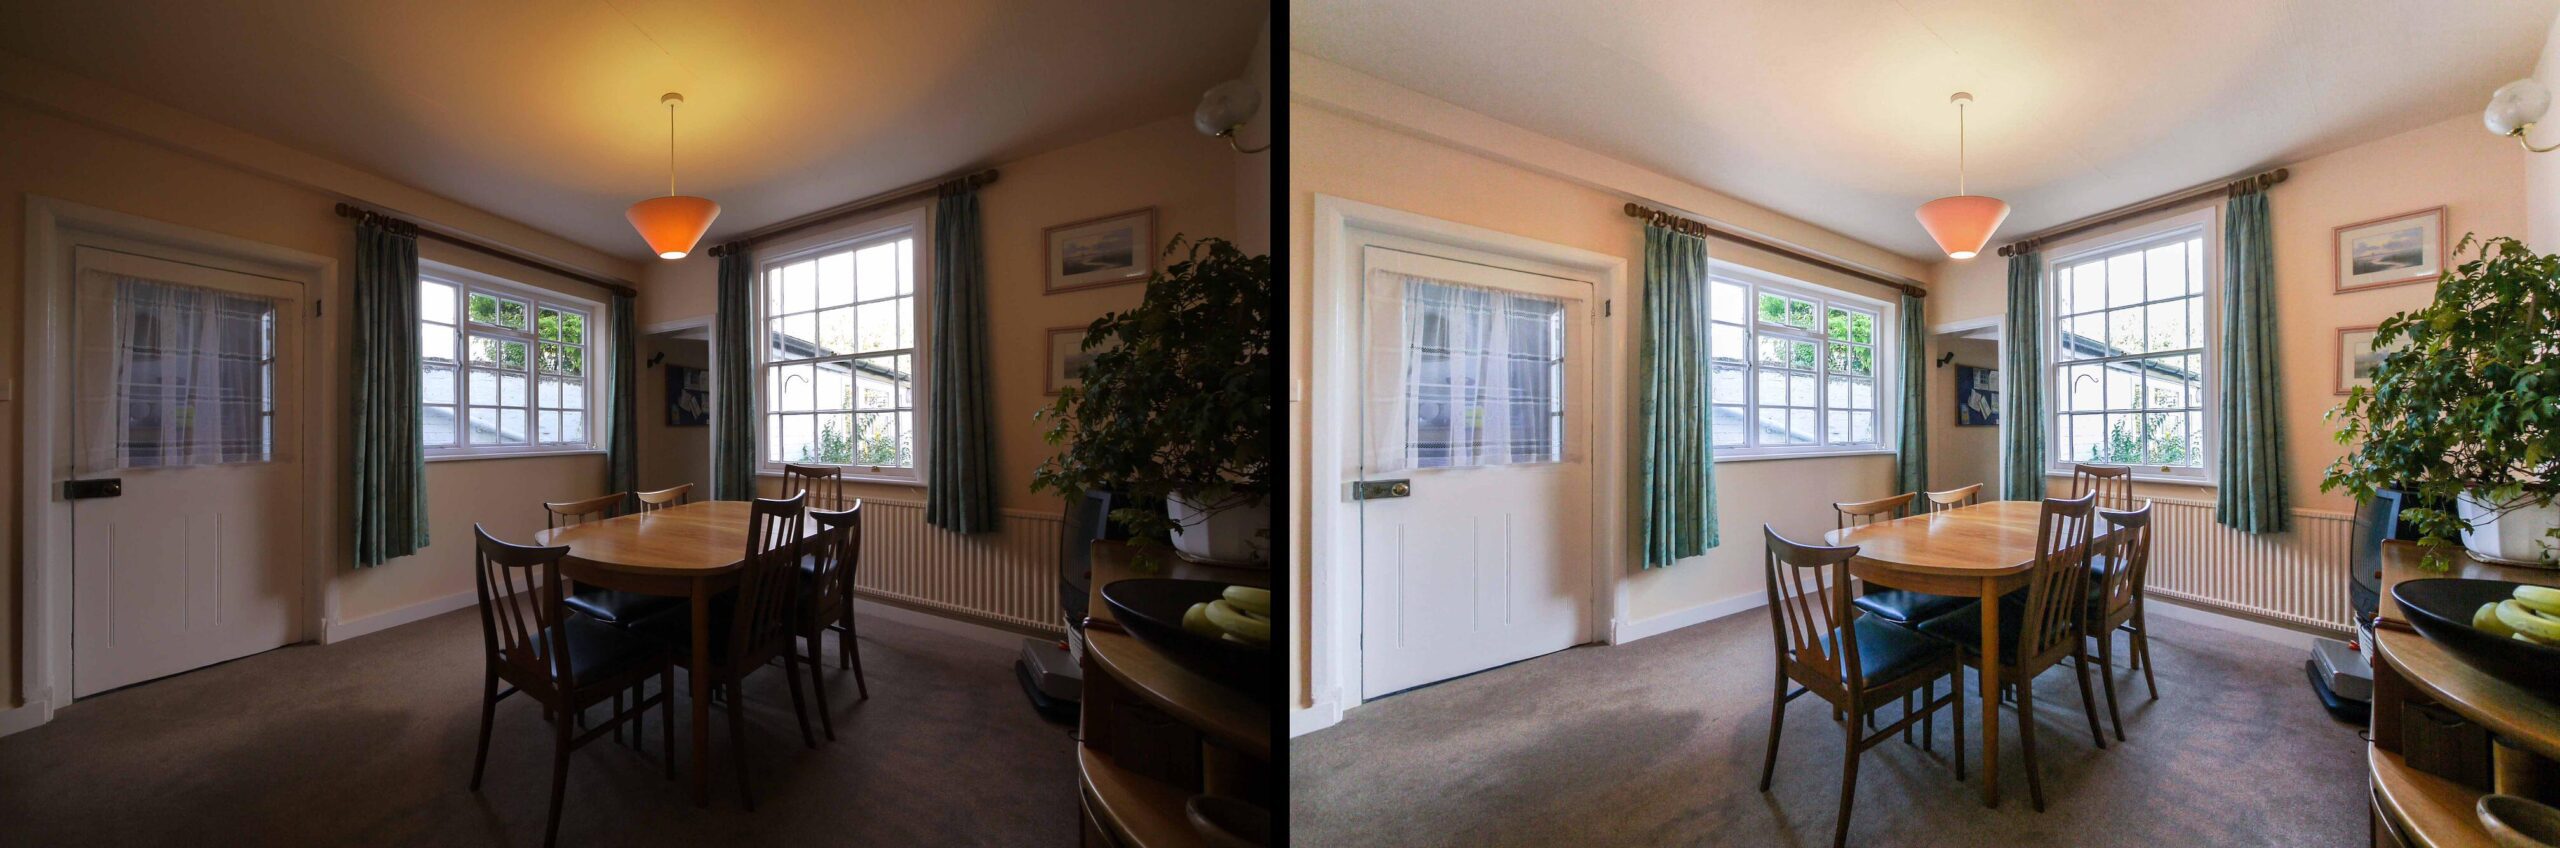 Before & After Property Photo Editing dark photo